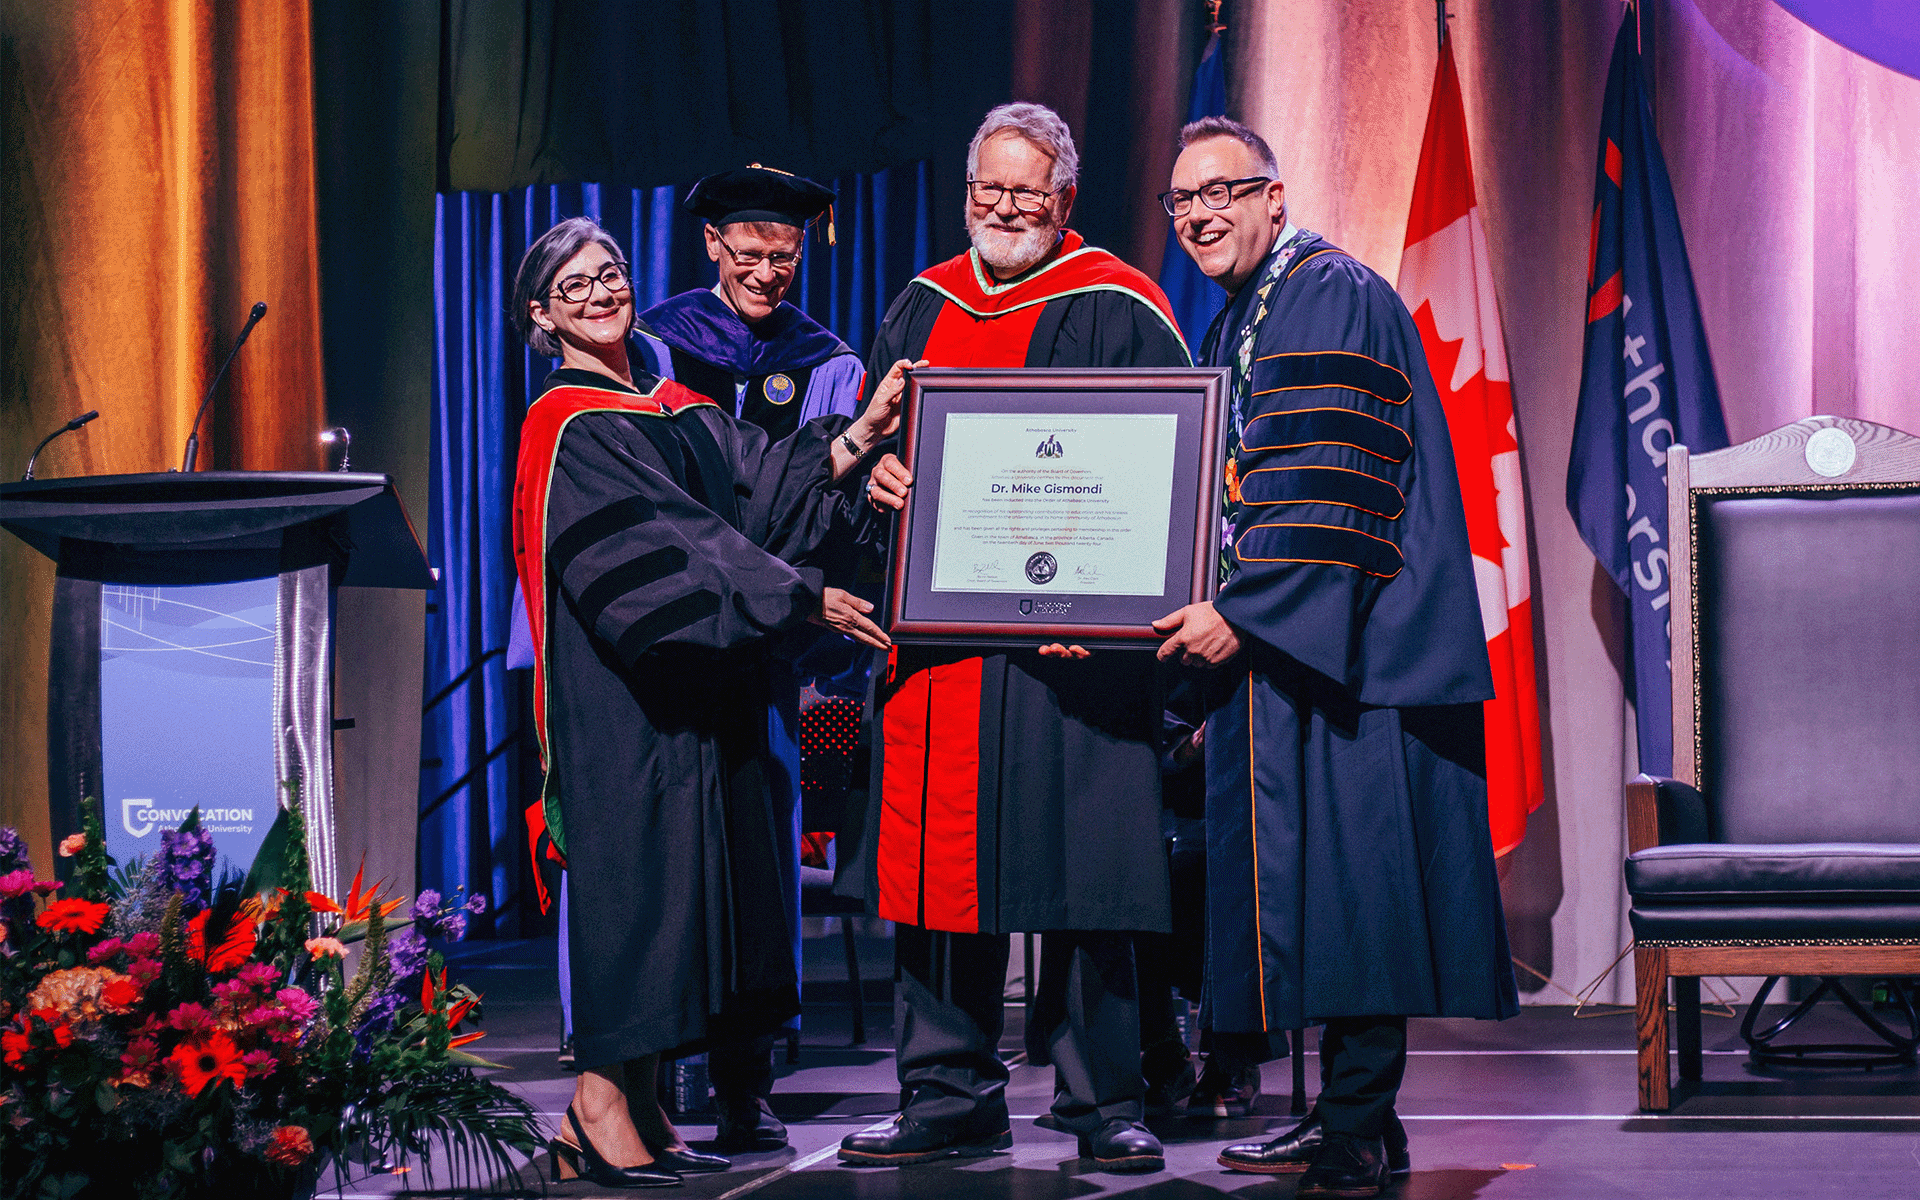 A woman and three men standing together with one of them holding a large framed document for the Order of Athabasca University awarded to Dr. Mike Gismondi during the convocation ceremony